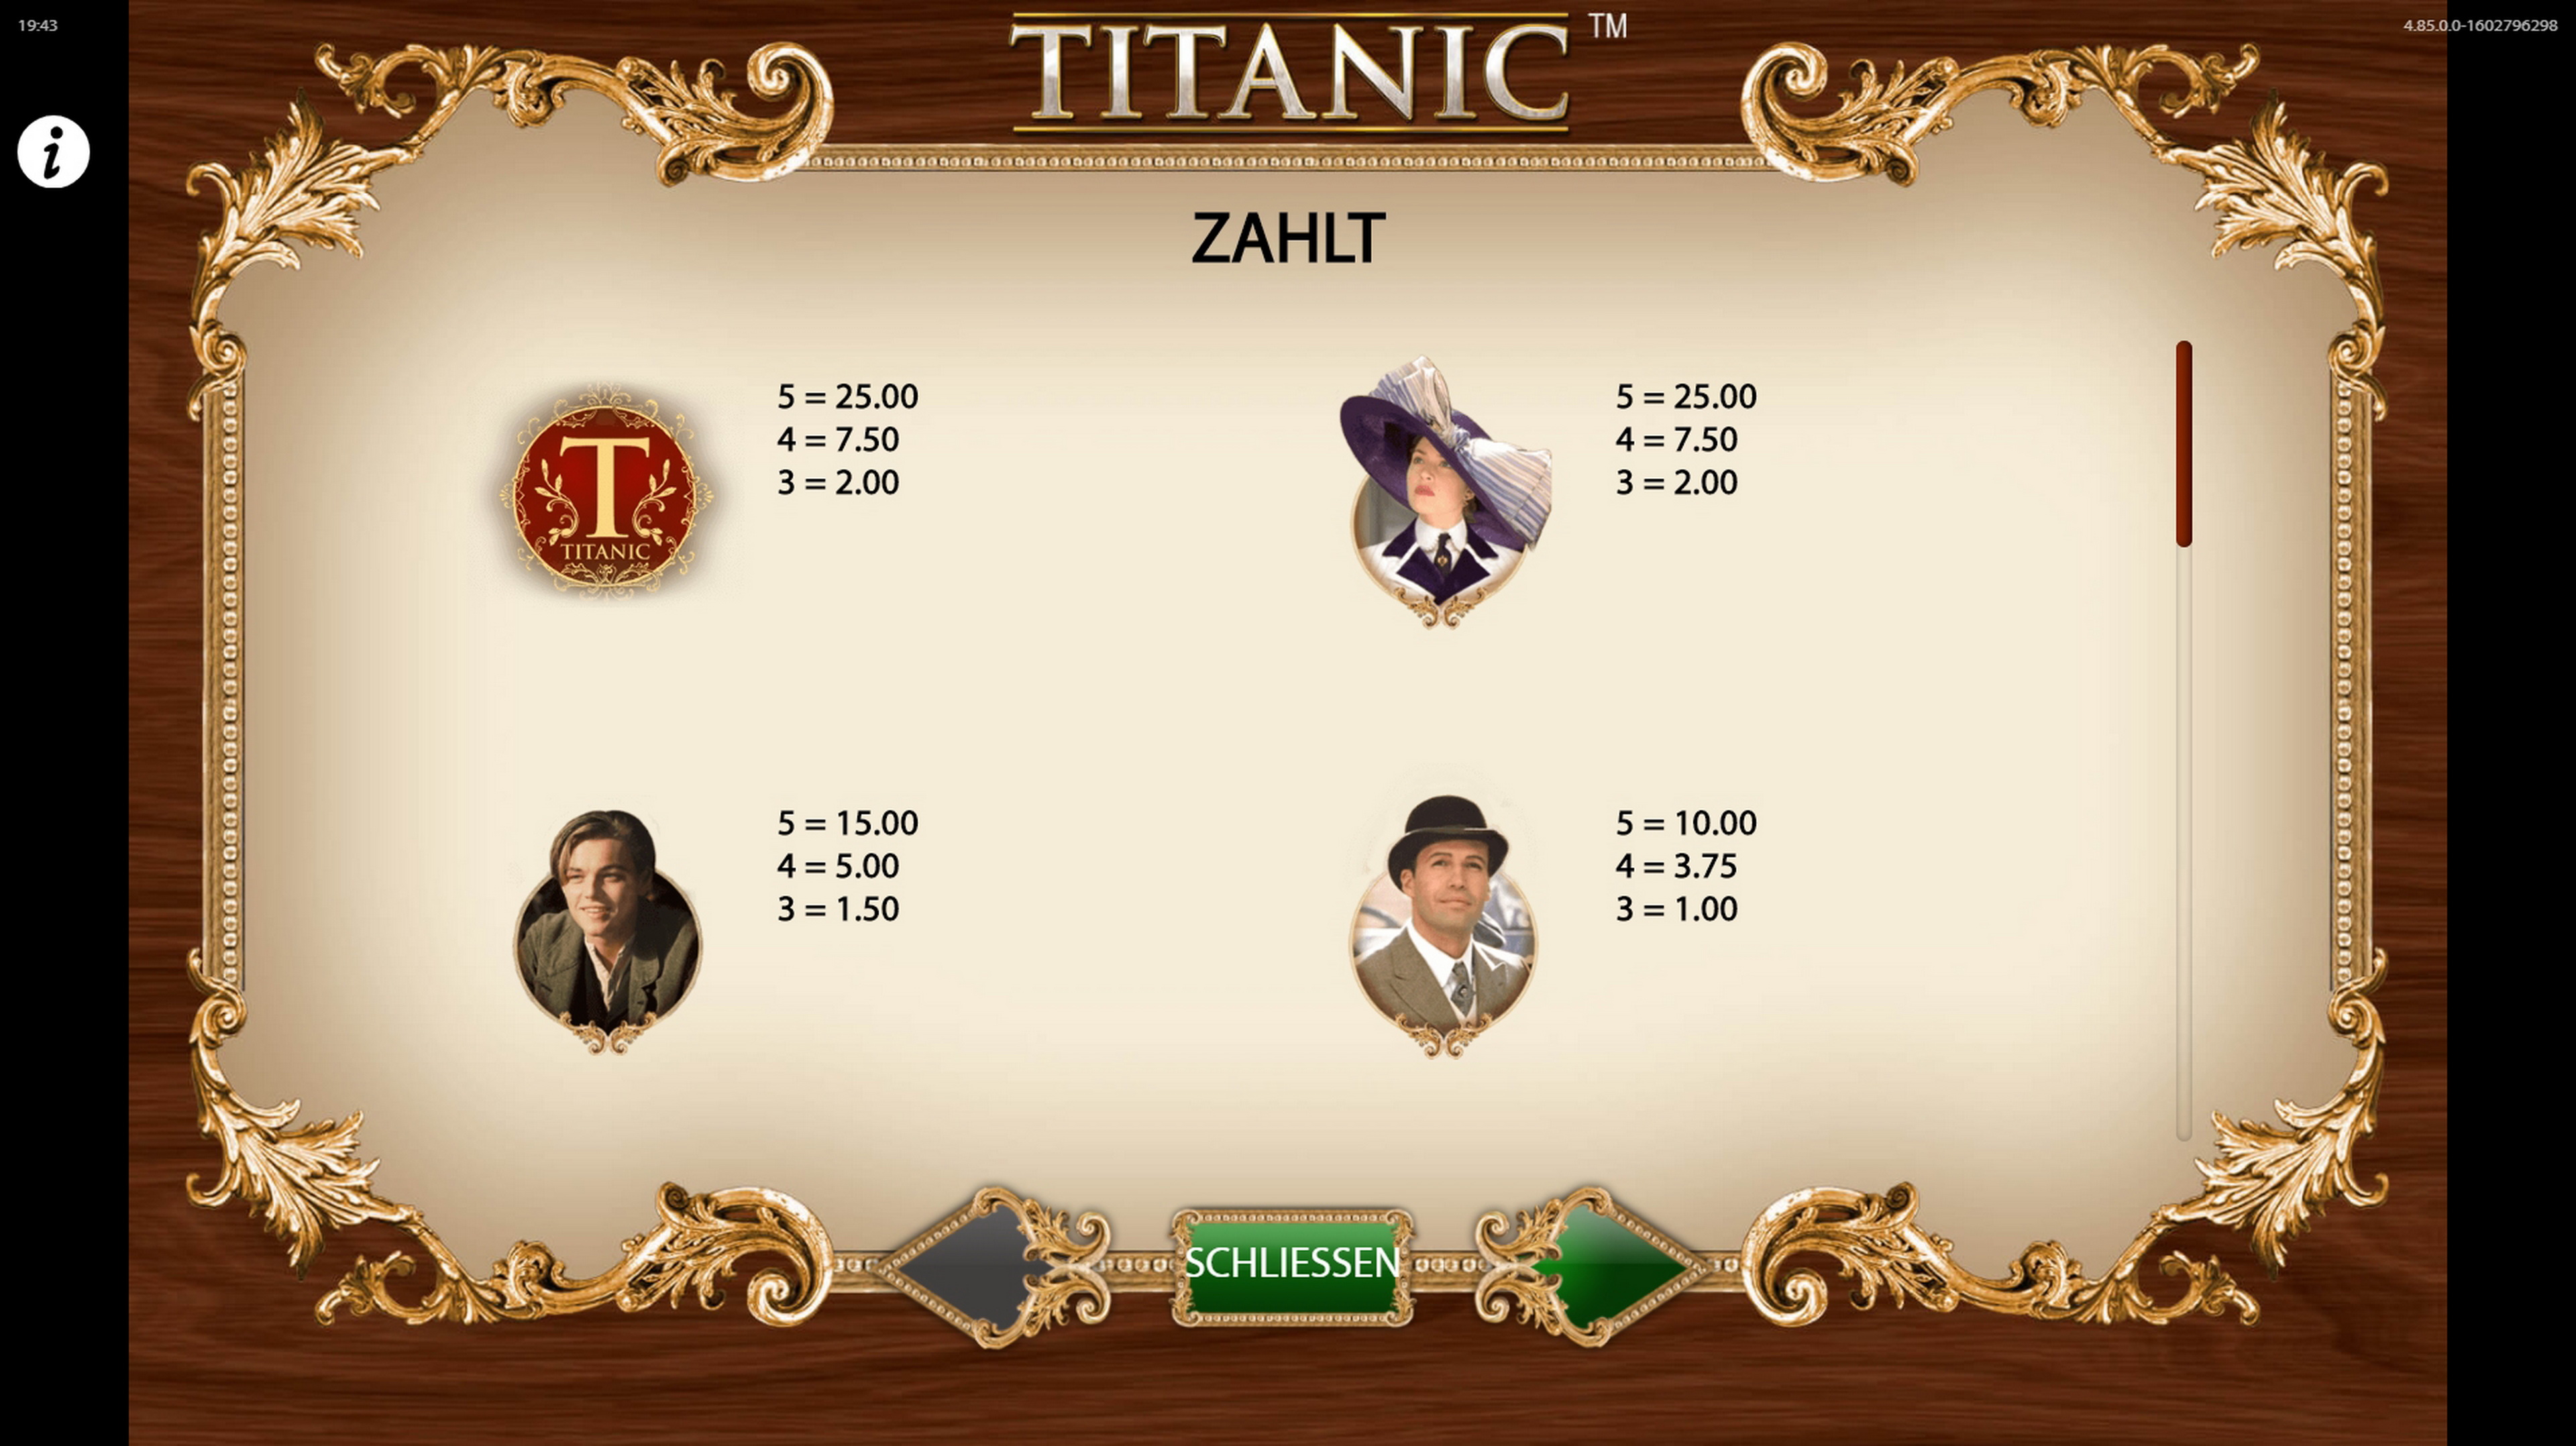 Info of TITANIC Slot Game by Bally Technologies